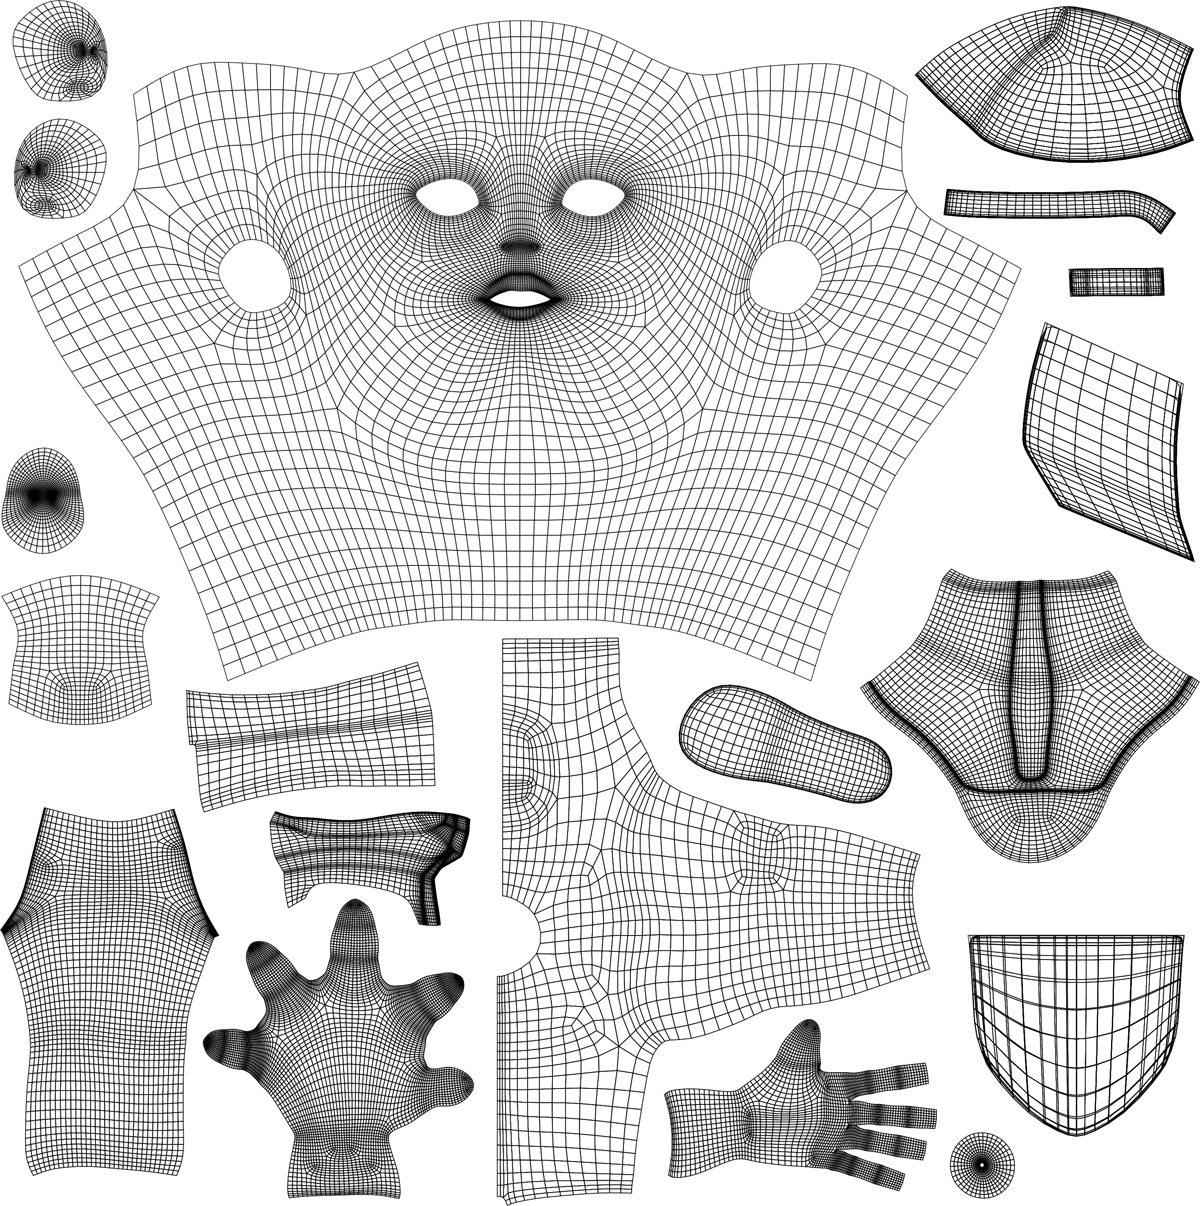 An image displaying the unwrapped UVs of different parts of the 3D model is shown. The images projected are that of the face, hat, jacket, boots, palms, badge, and ears.